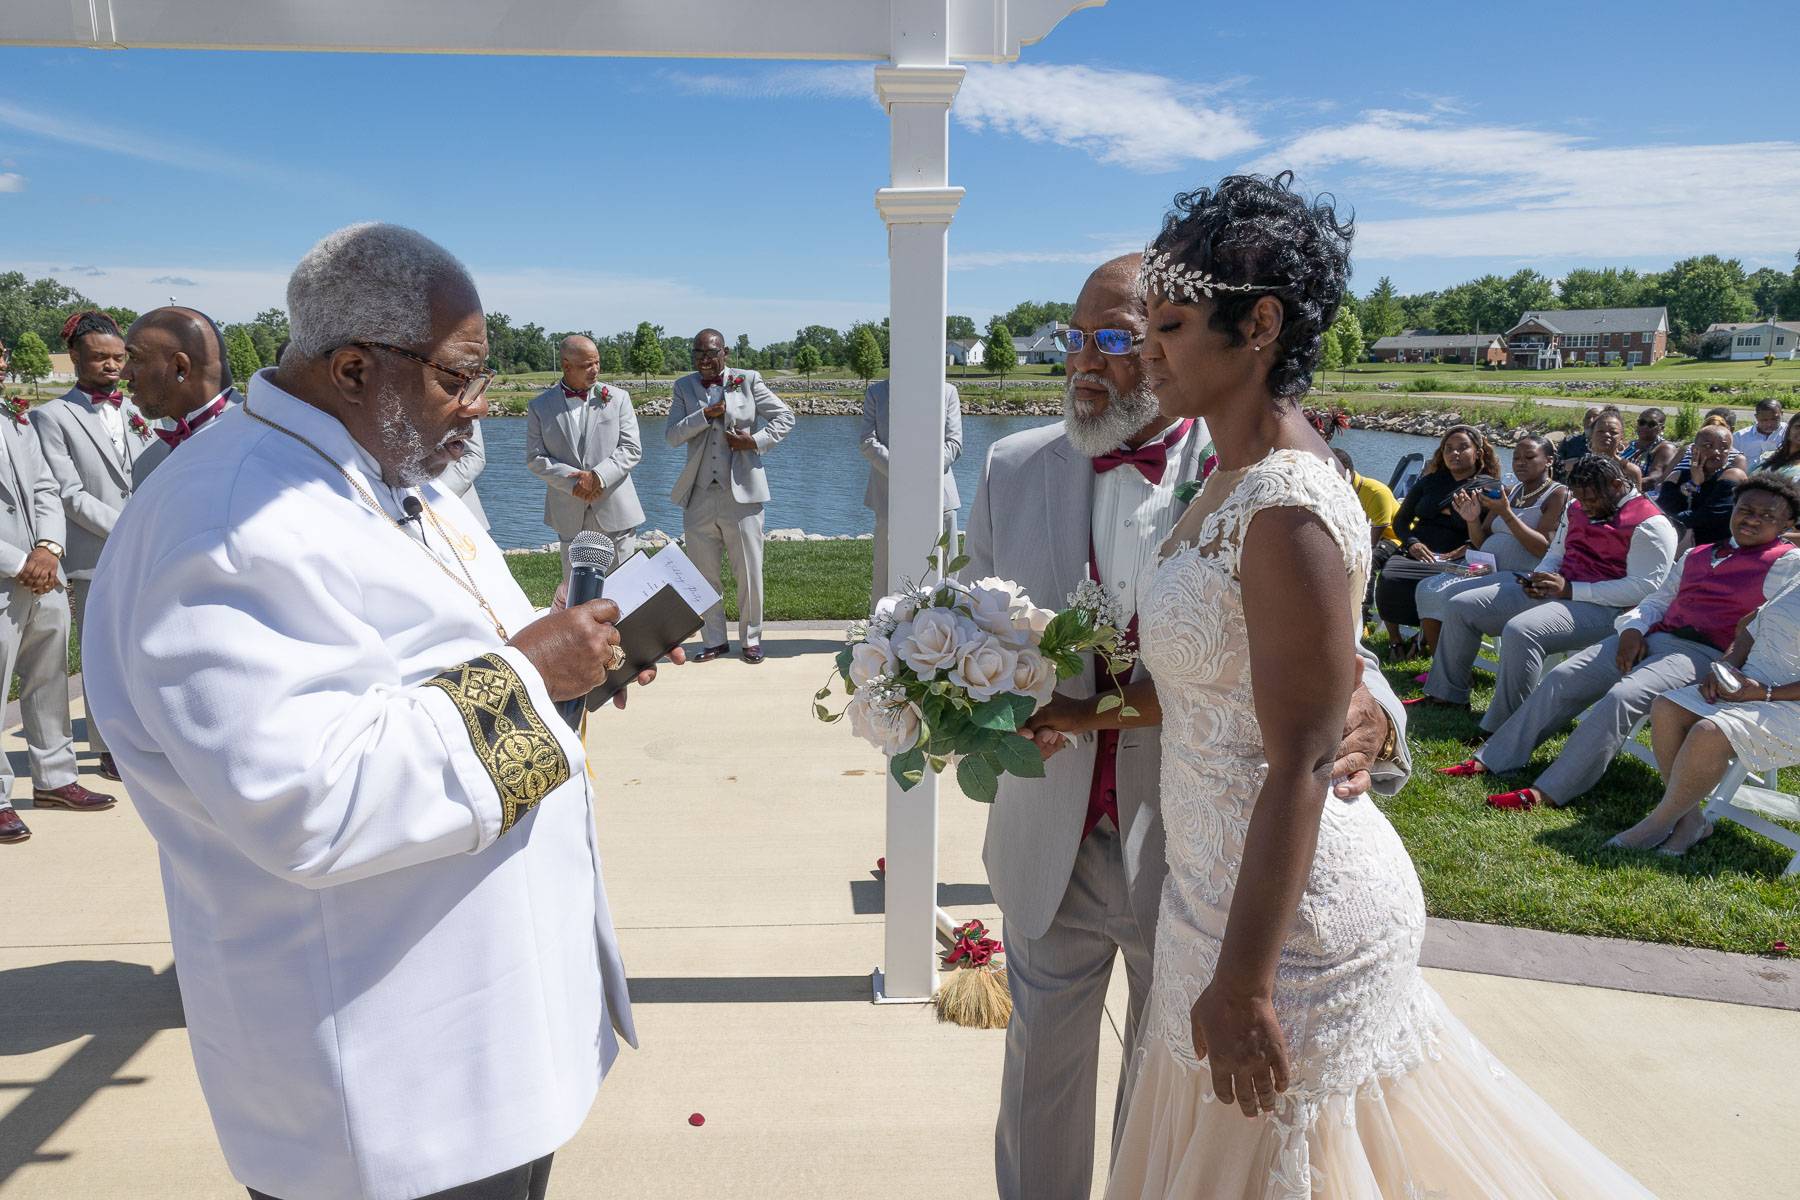 The bride and the bearded groom facing the officiant